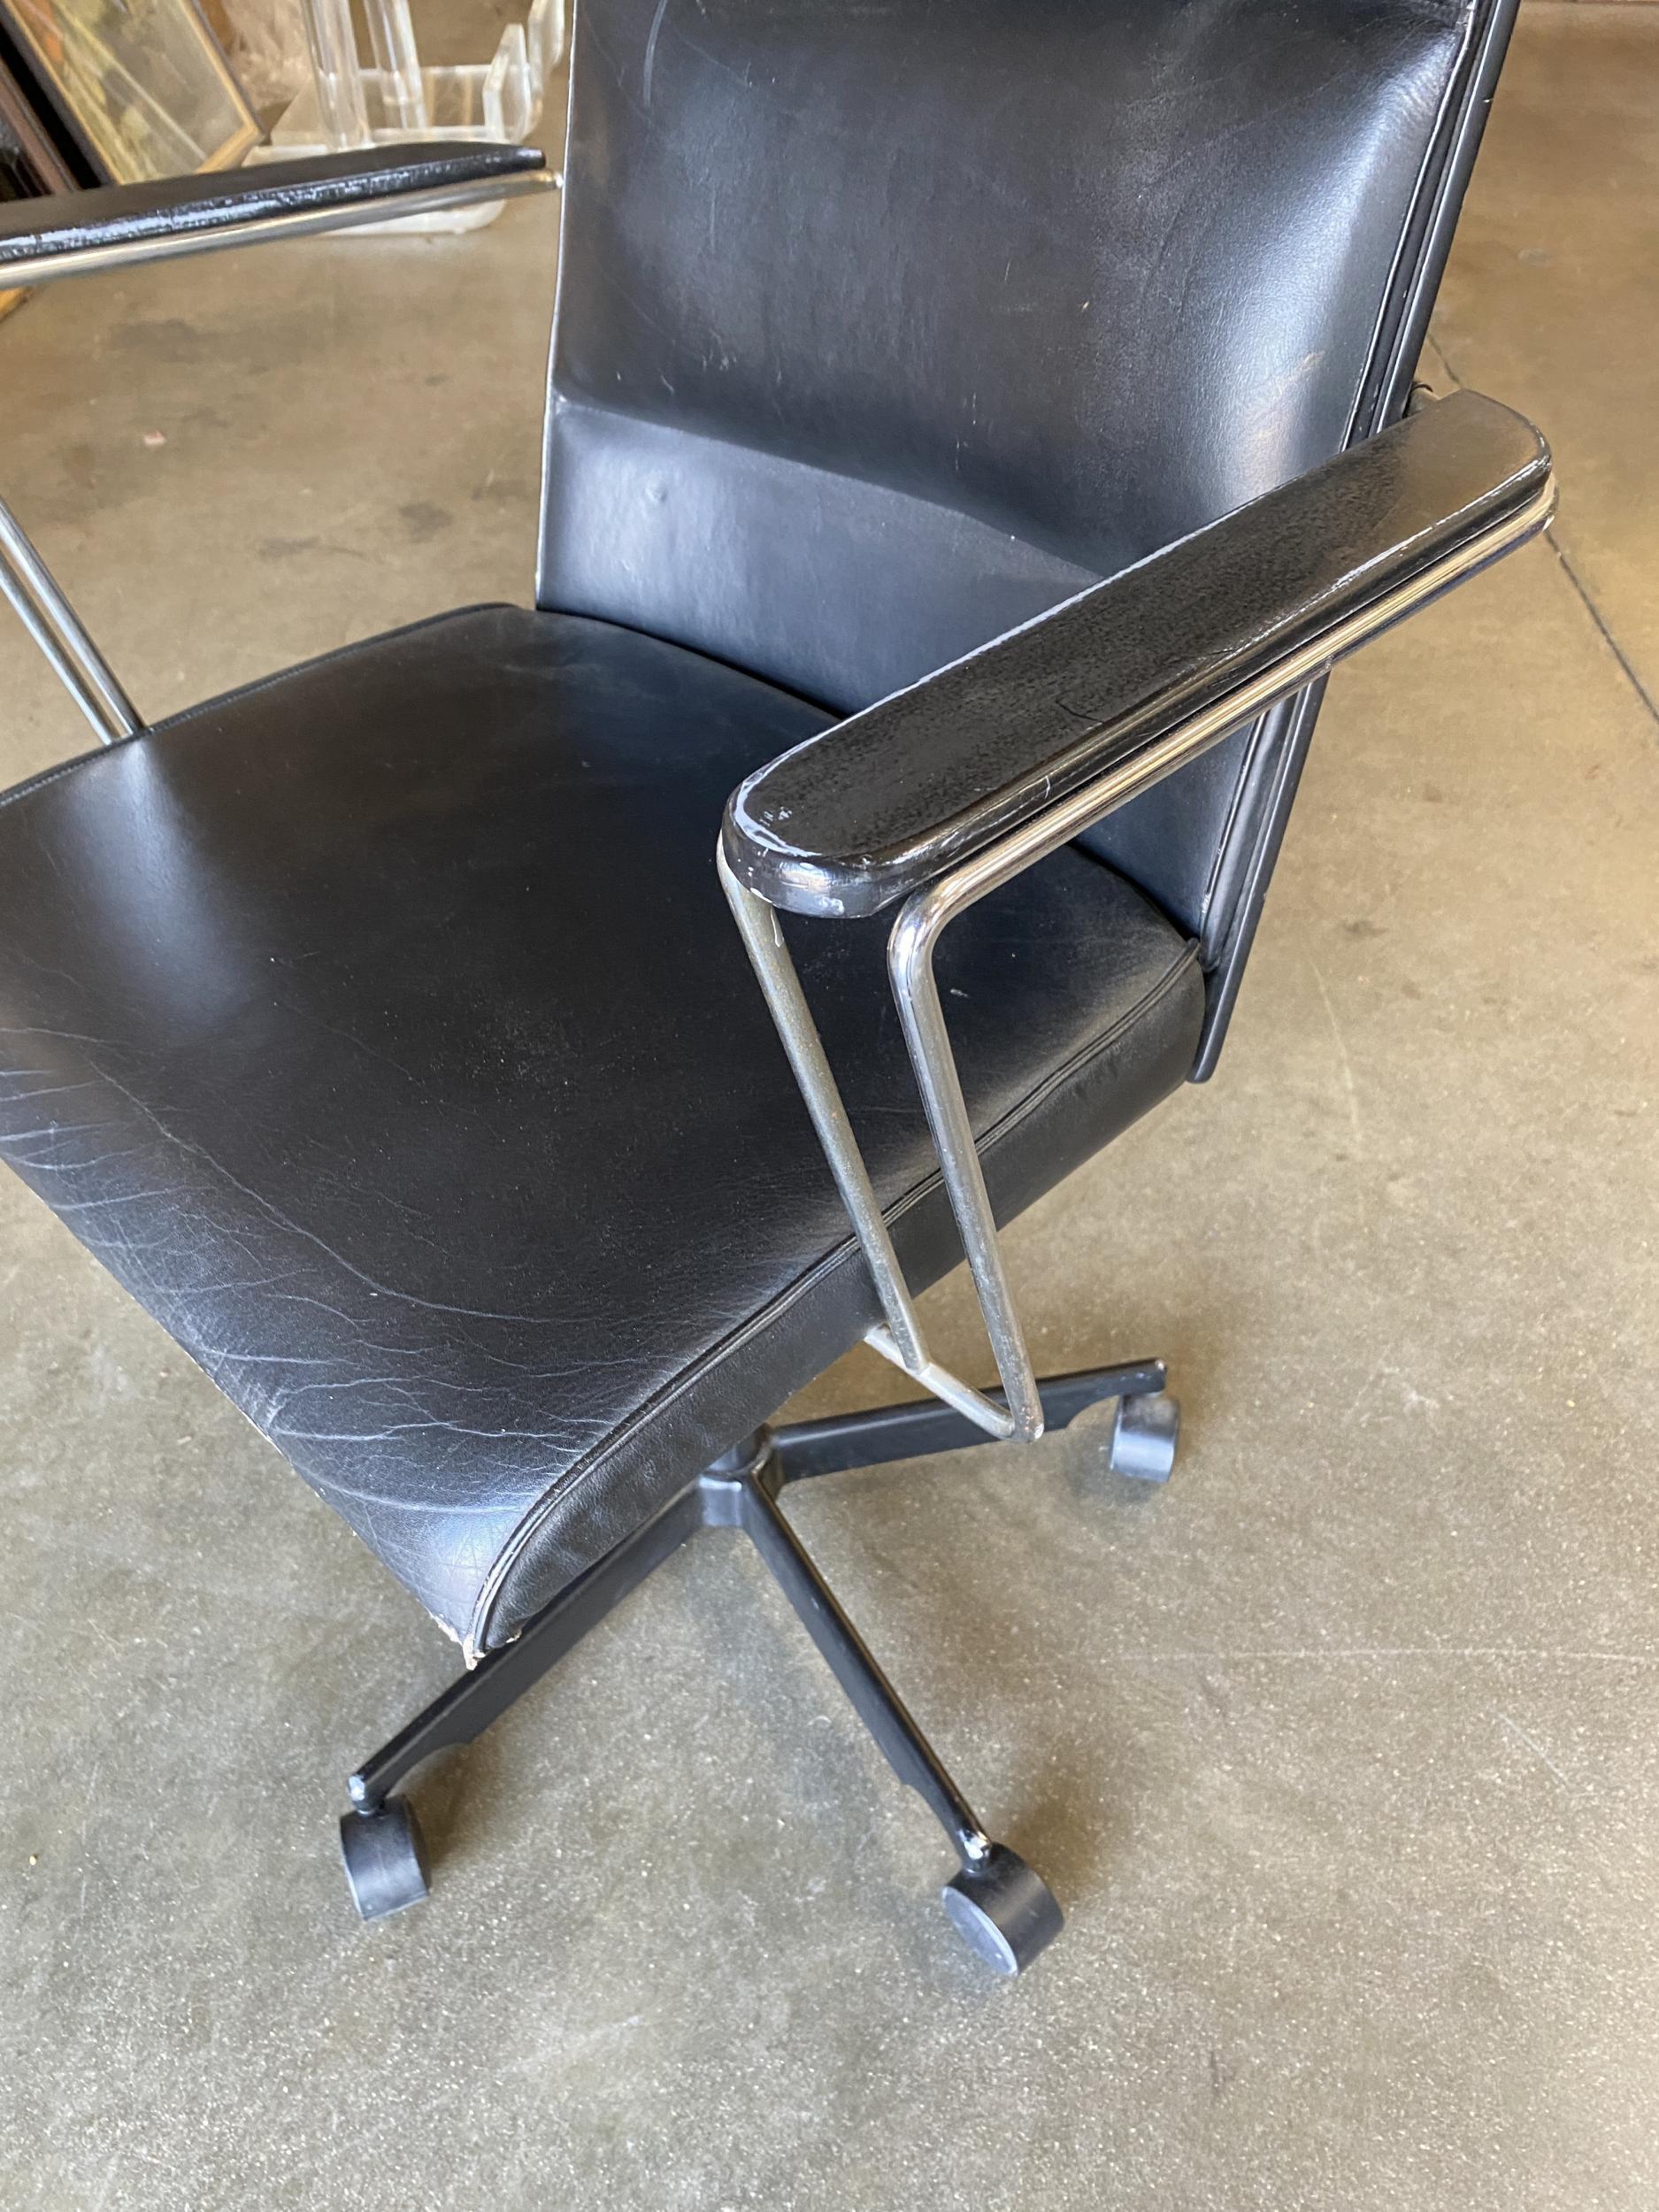 Danish naugahyde office chair designed by Jorgen Rasmussen for Kevi A/S. This piece includes an adjustable seat and backrest with a brown swivel base. 

Circa 1980.
   